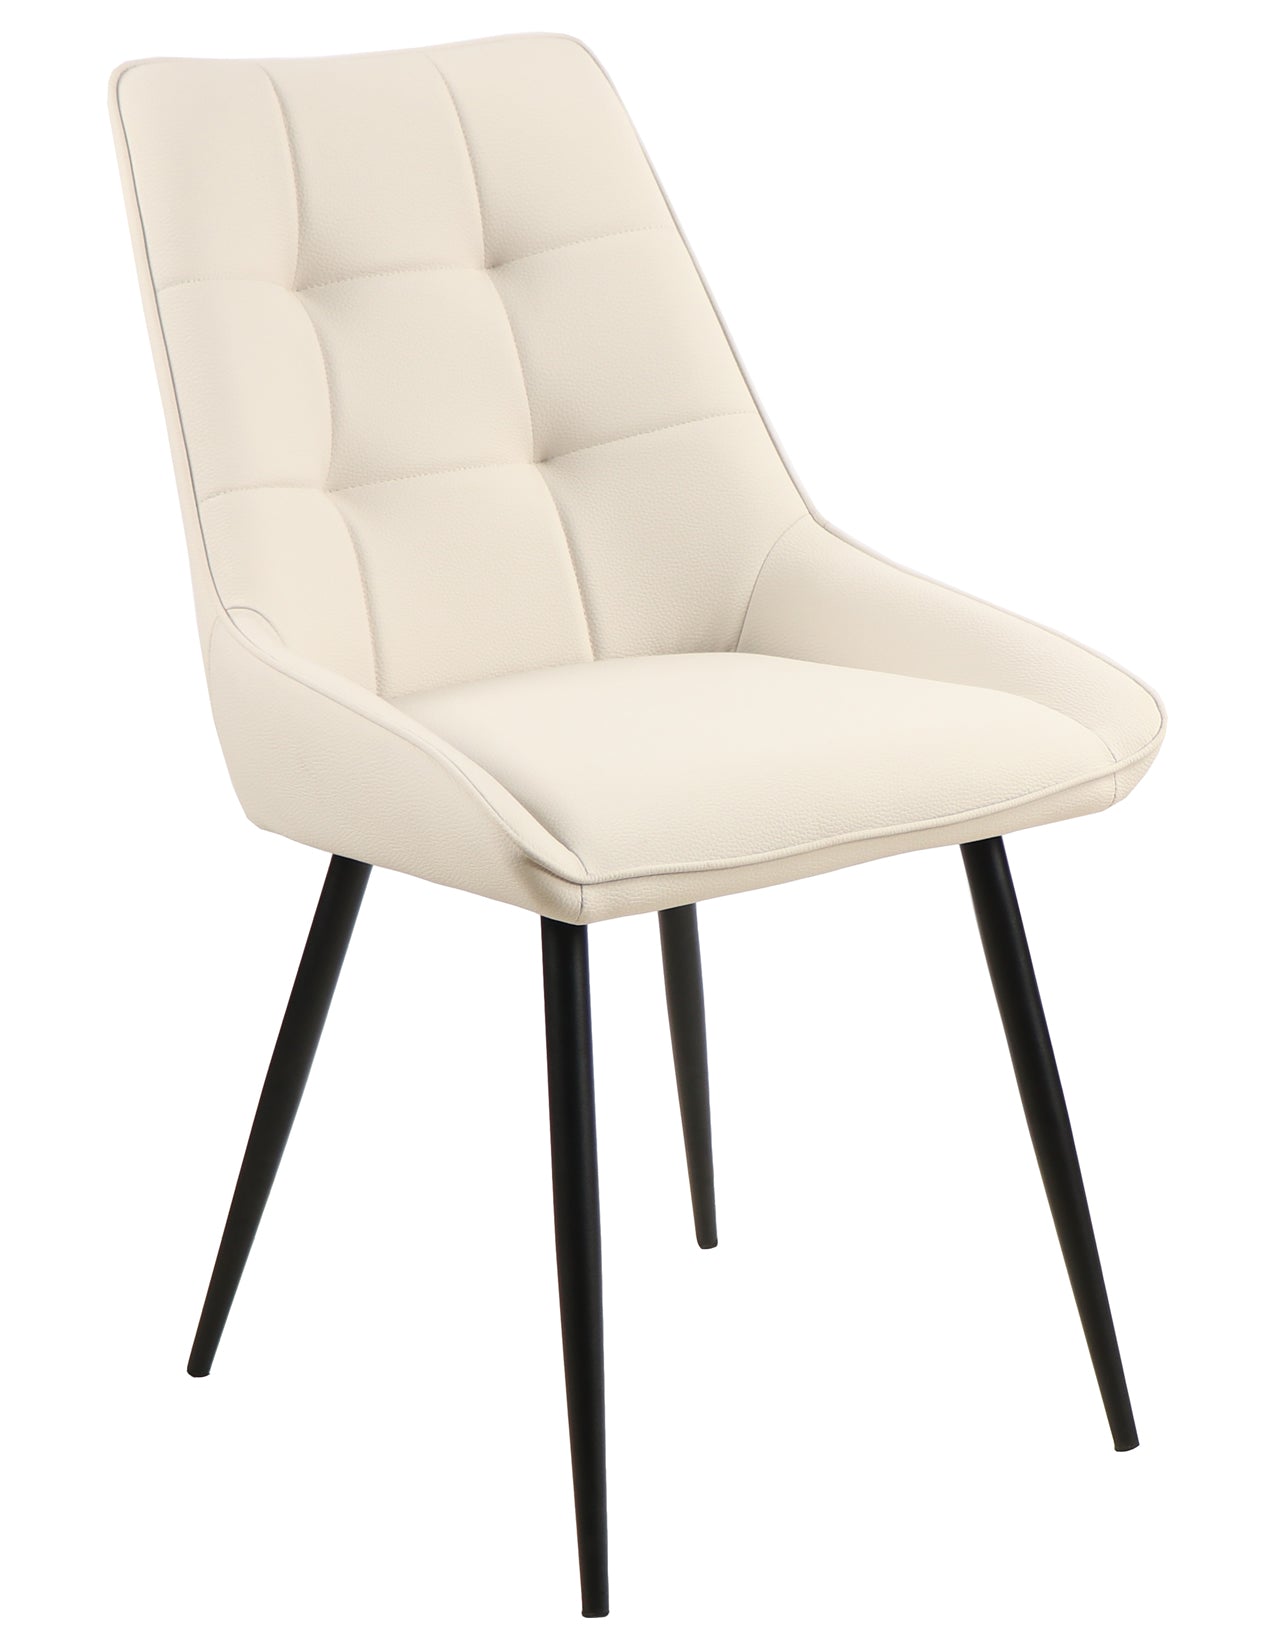 Ronan Dining Chair - Ivory (Set of 2)